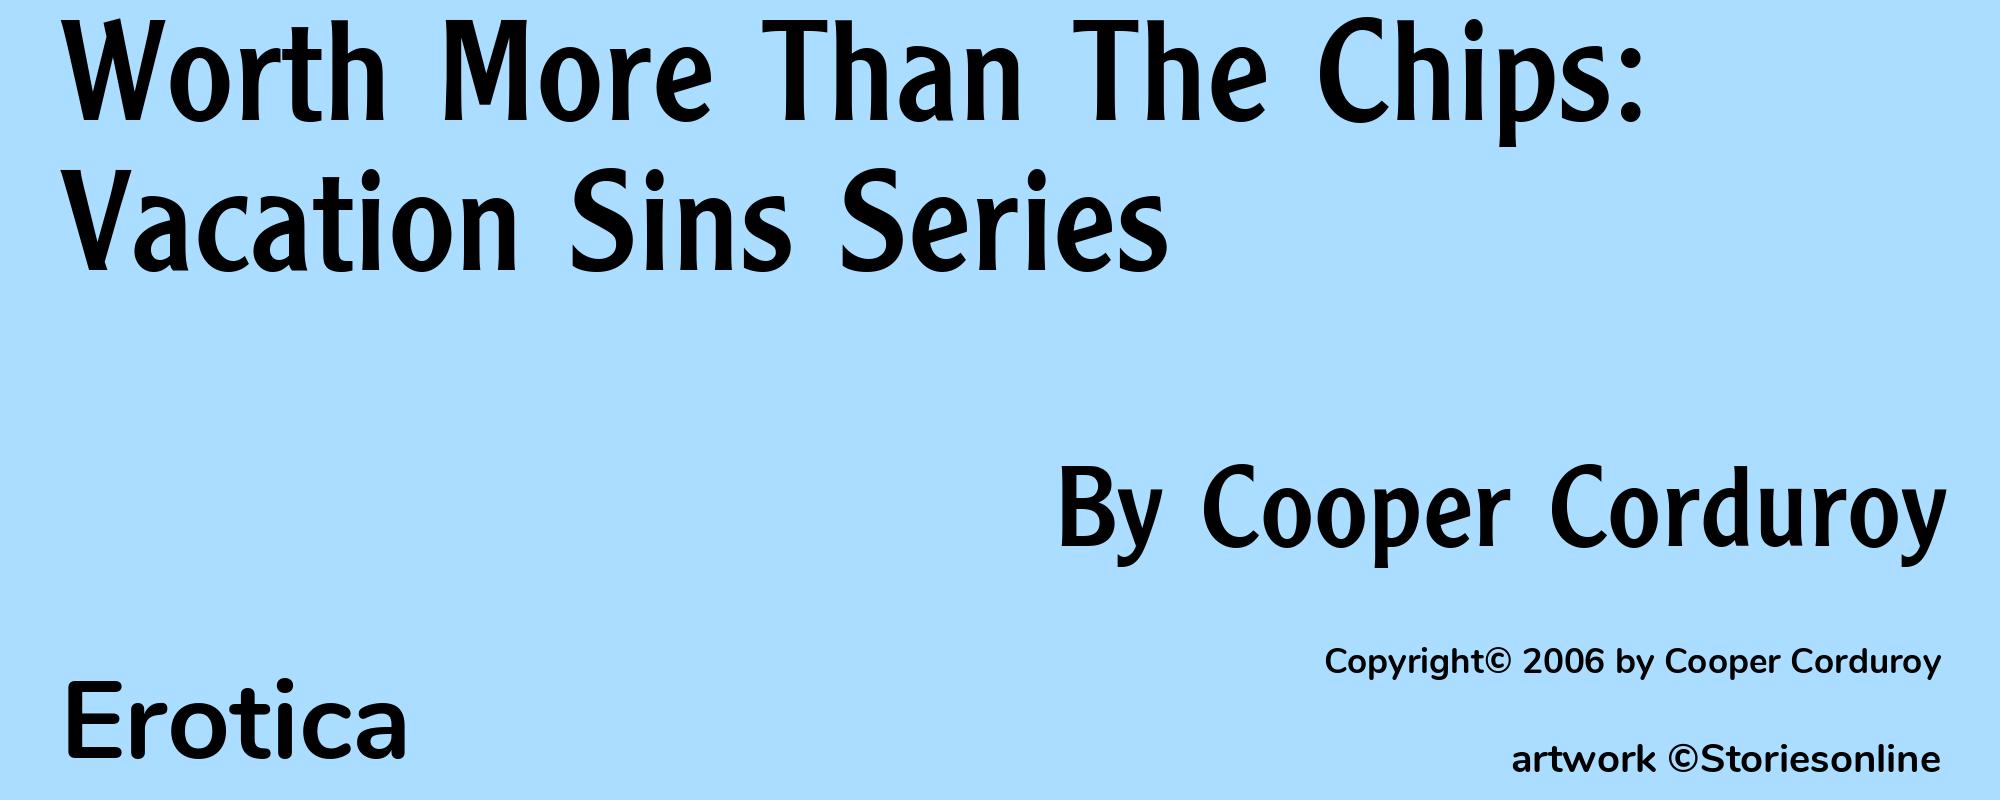 Worth More Than The Chips: Vacation Sins Series - Cover